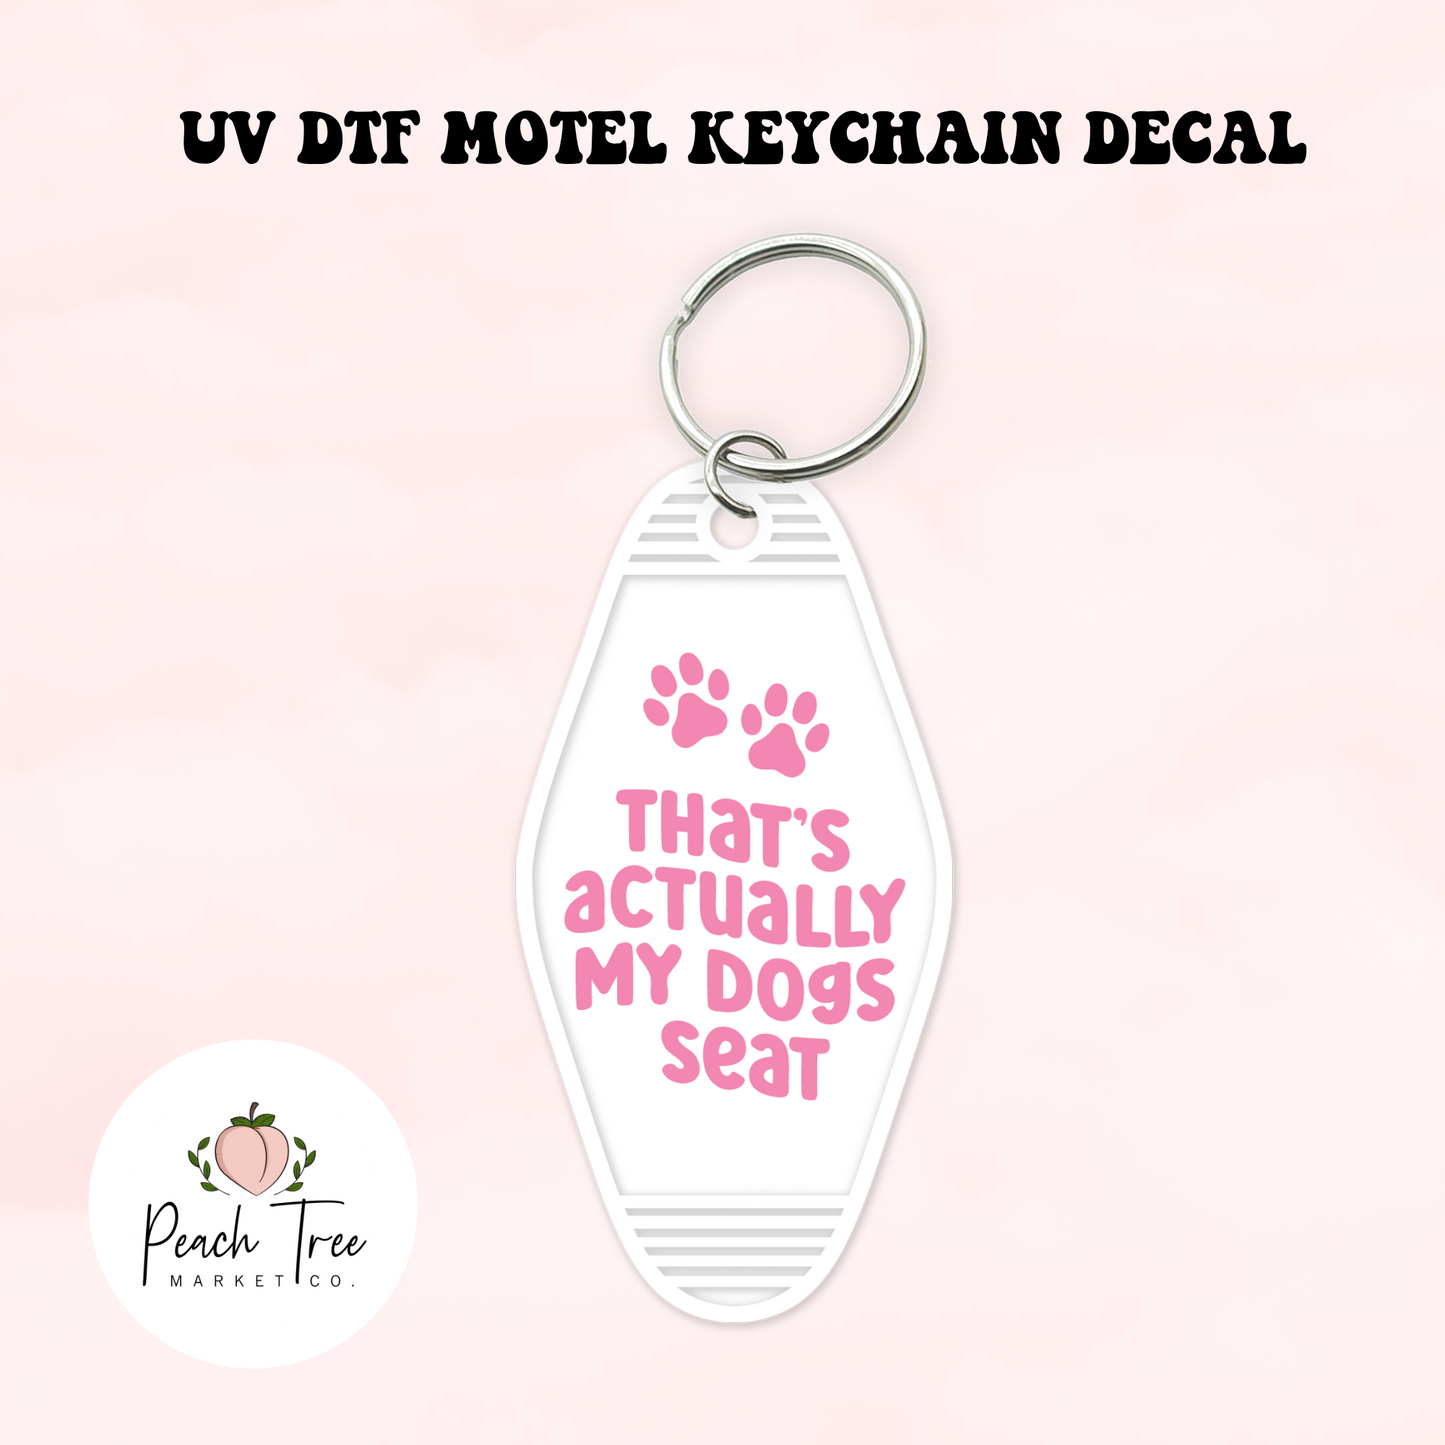 My Dogs Seat UV DTF Motel Keychain Decal